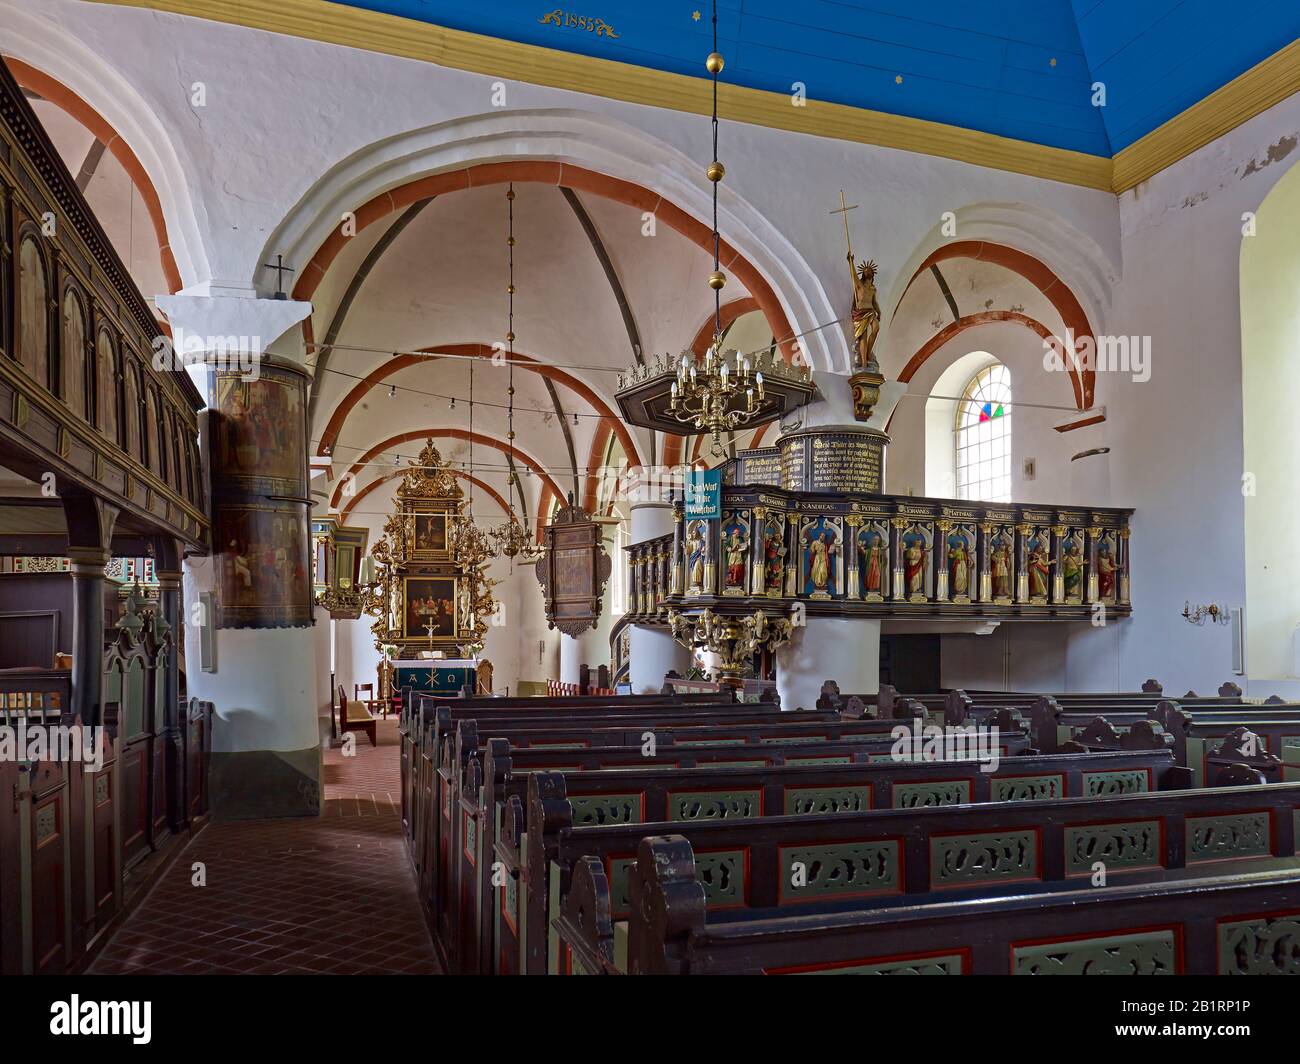 Interior view of the St. Severikirche church in the North Sea resort of Otterndorf, state of Hadeln, Lower Saxony, Germany, Stock Photo